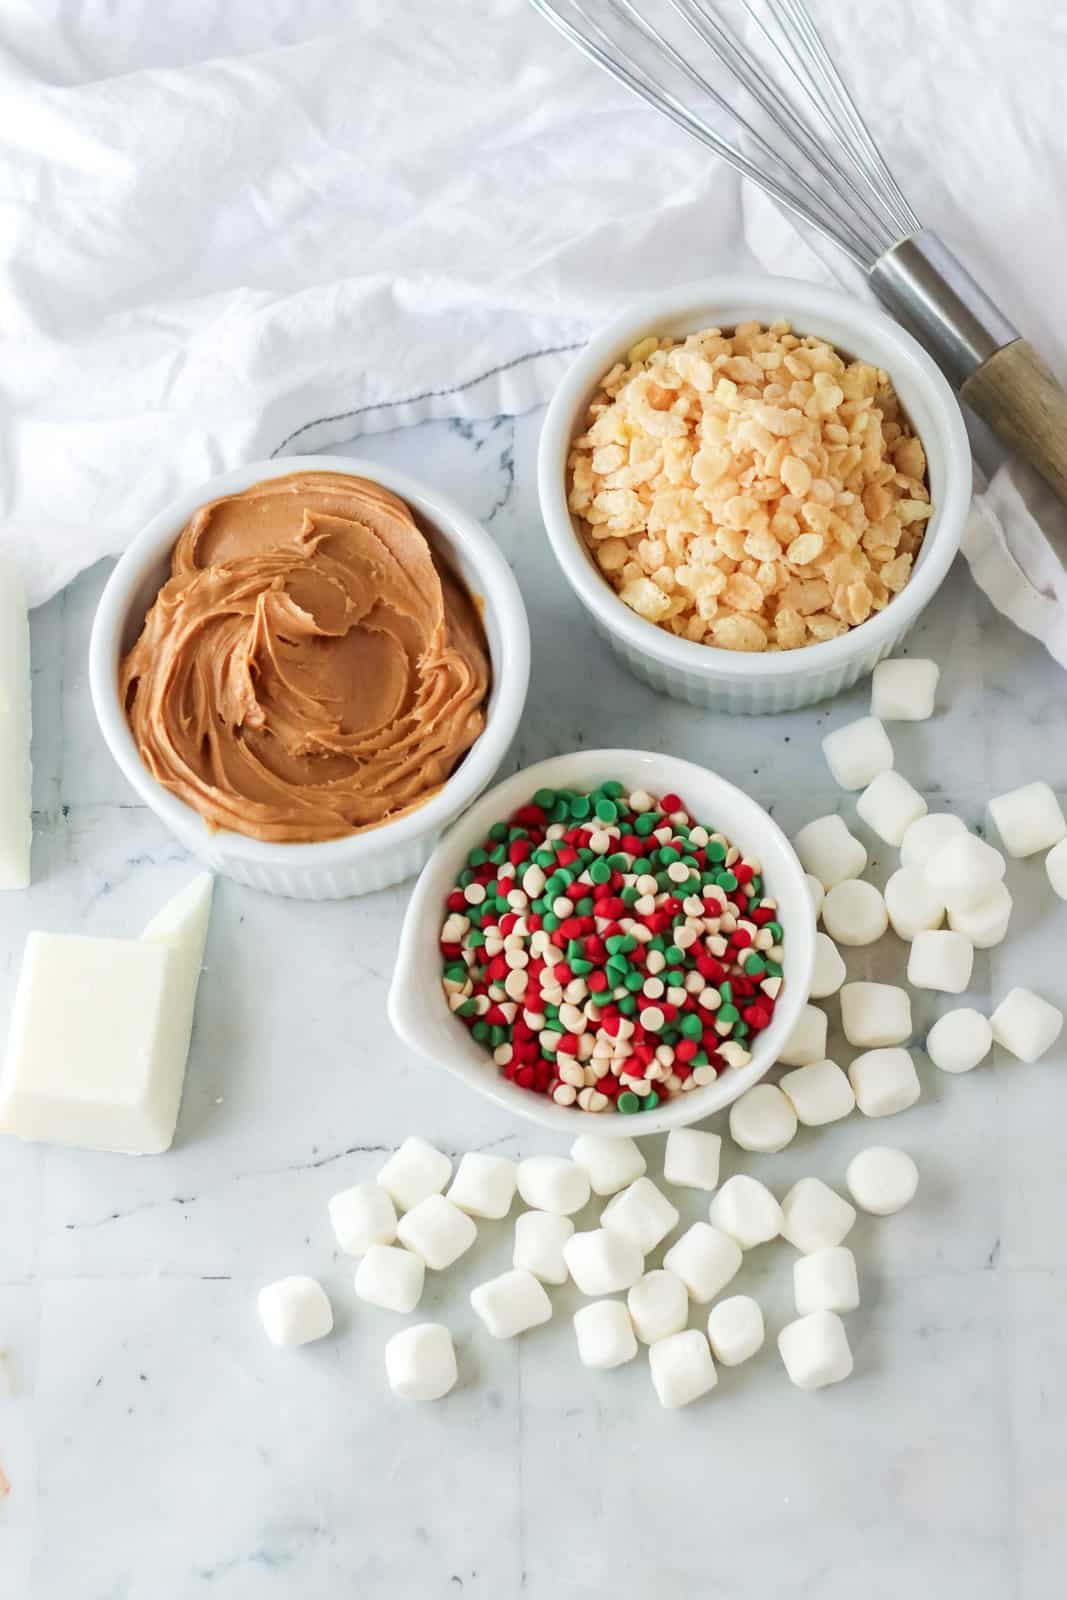 Ingredients needed: almond bark, creamy peanut butter, Rice Krispies cereal, mini marshmallows and holiday mini chips or sprinkles.